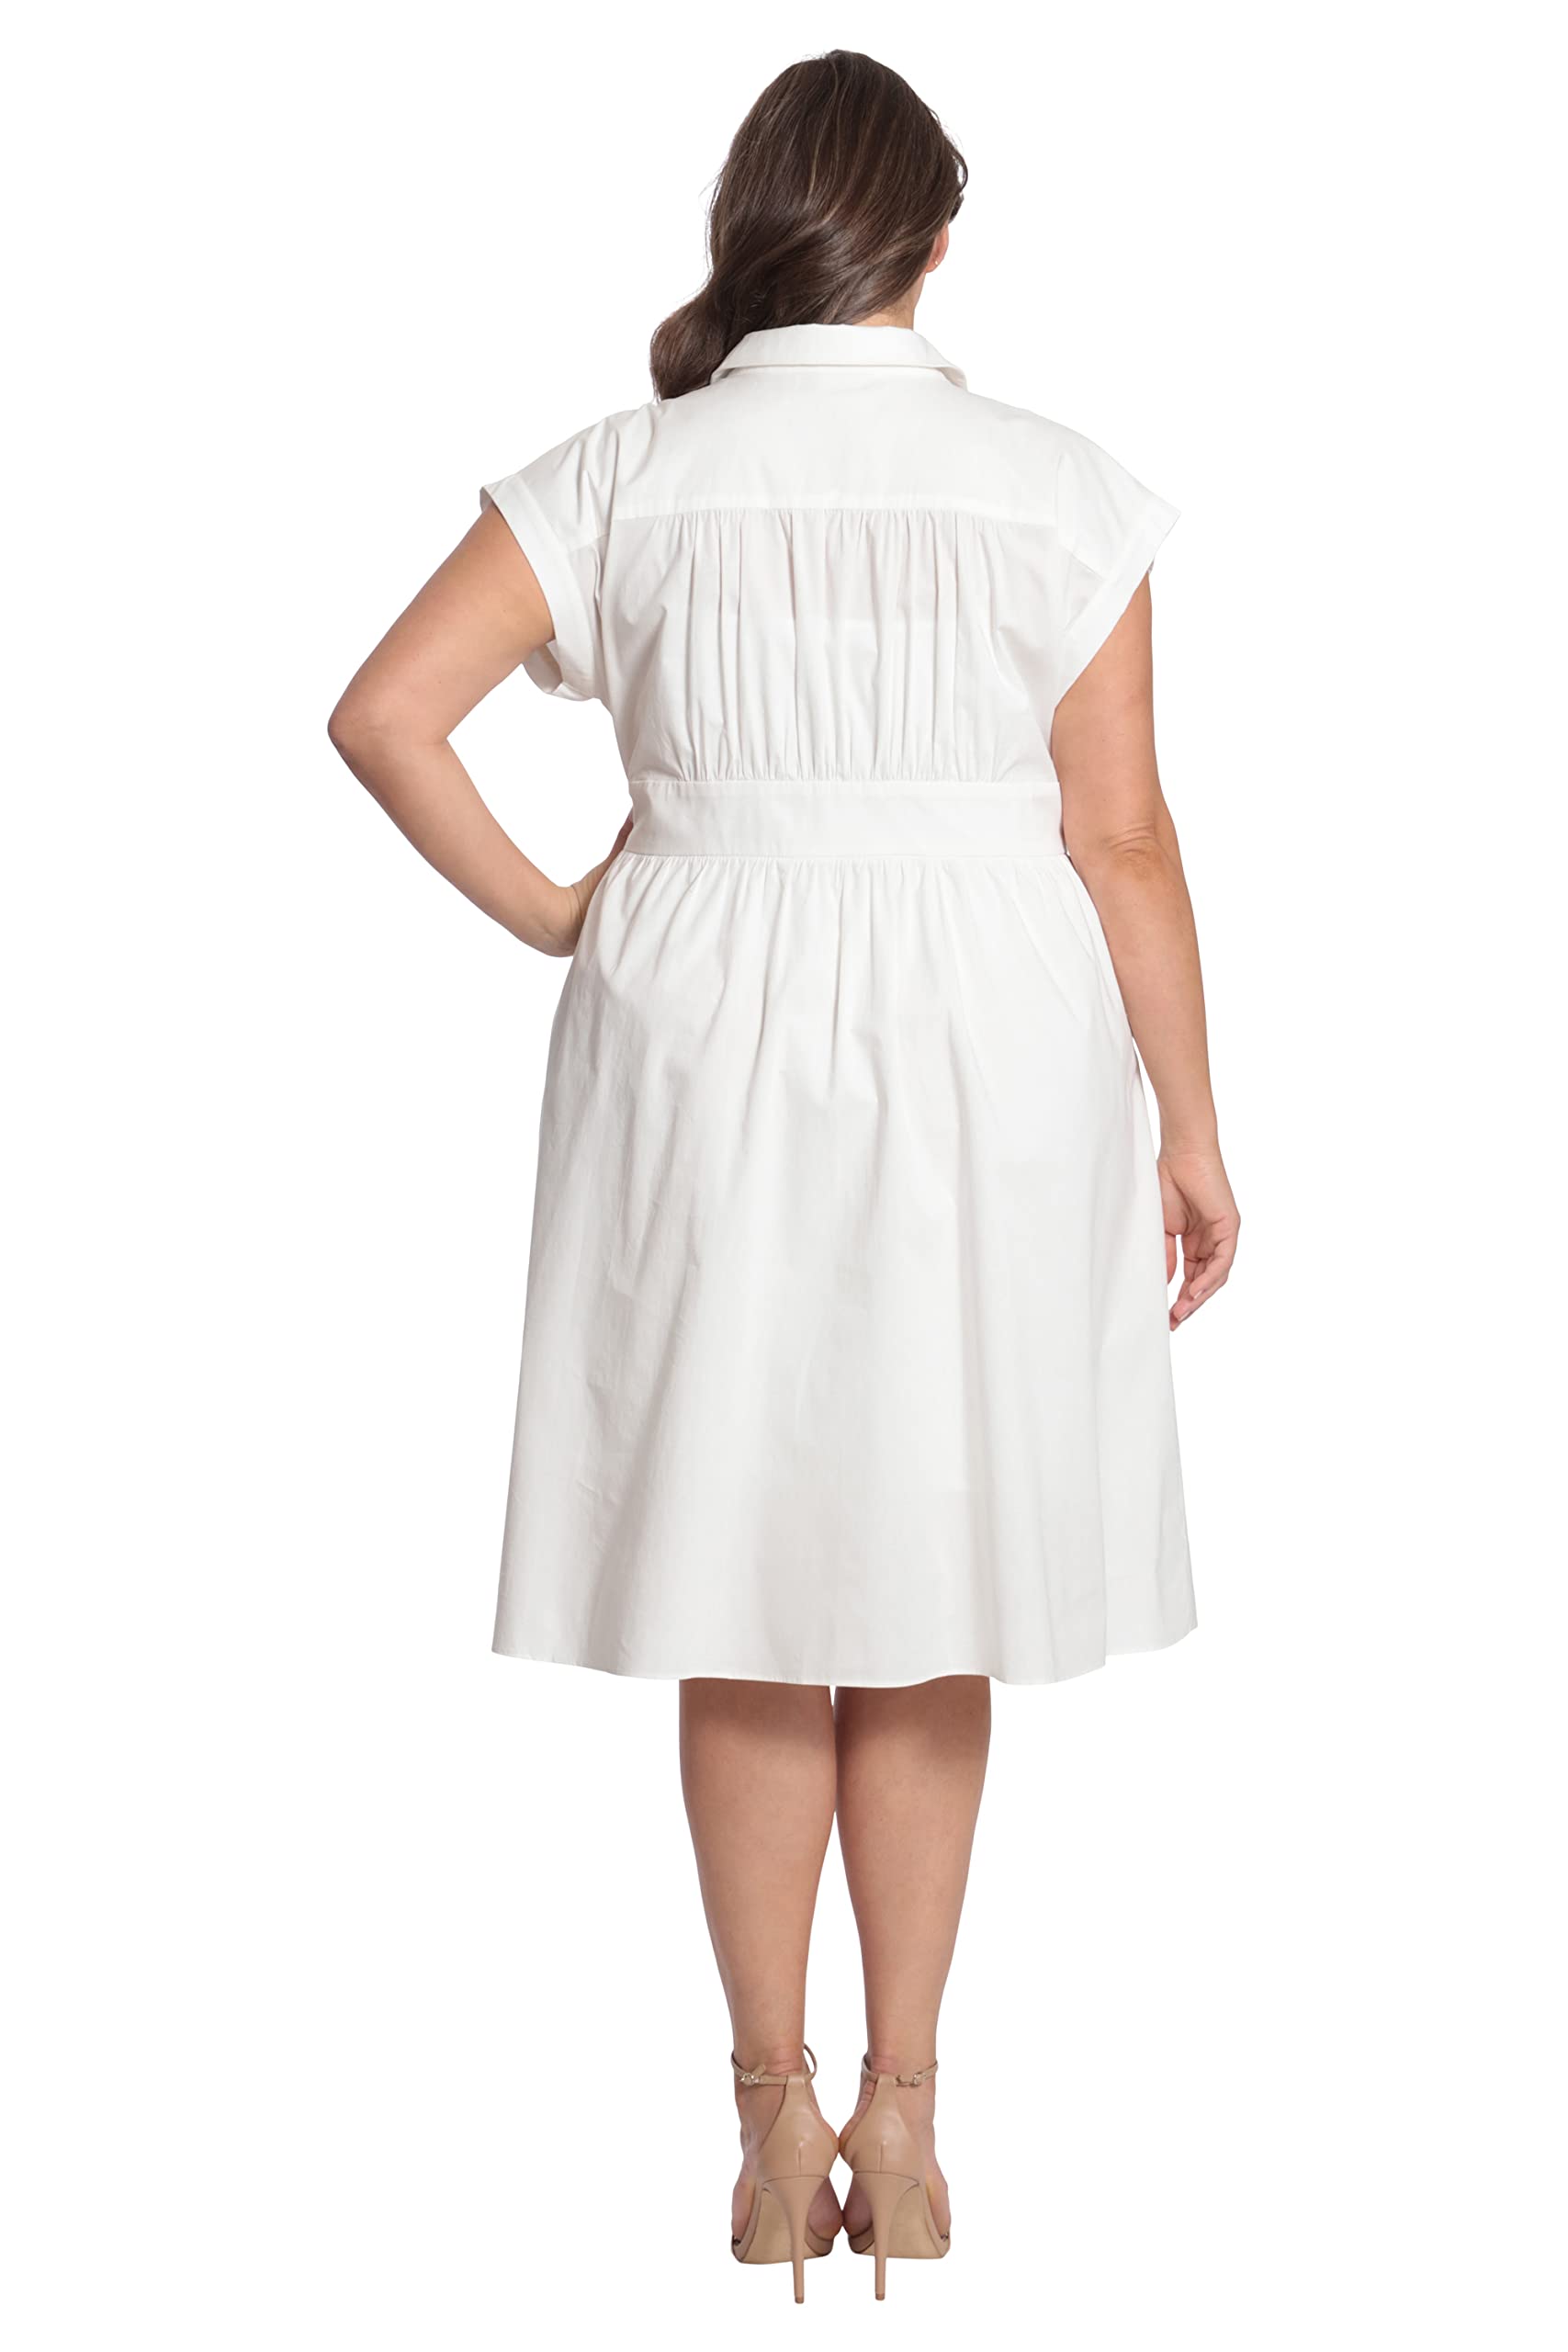 Maggy London Women's Cap Sleeve Collar Dress with Wide Waistband and Front Placket